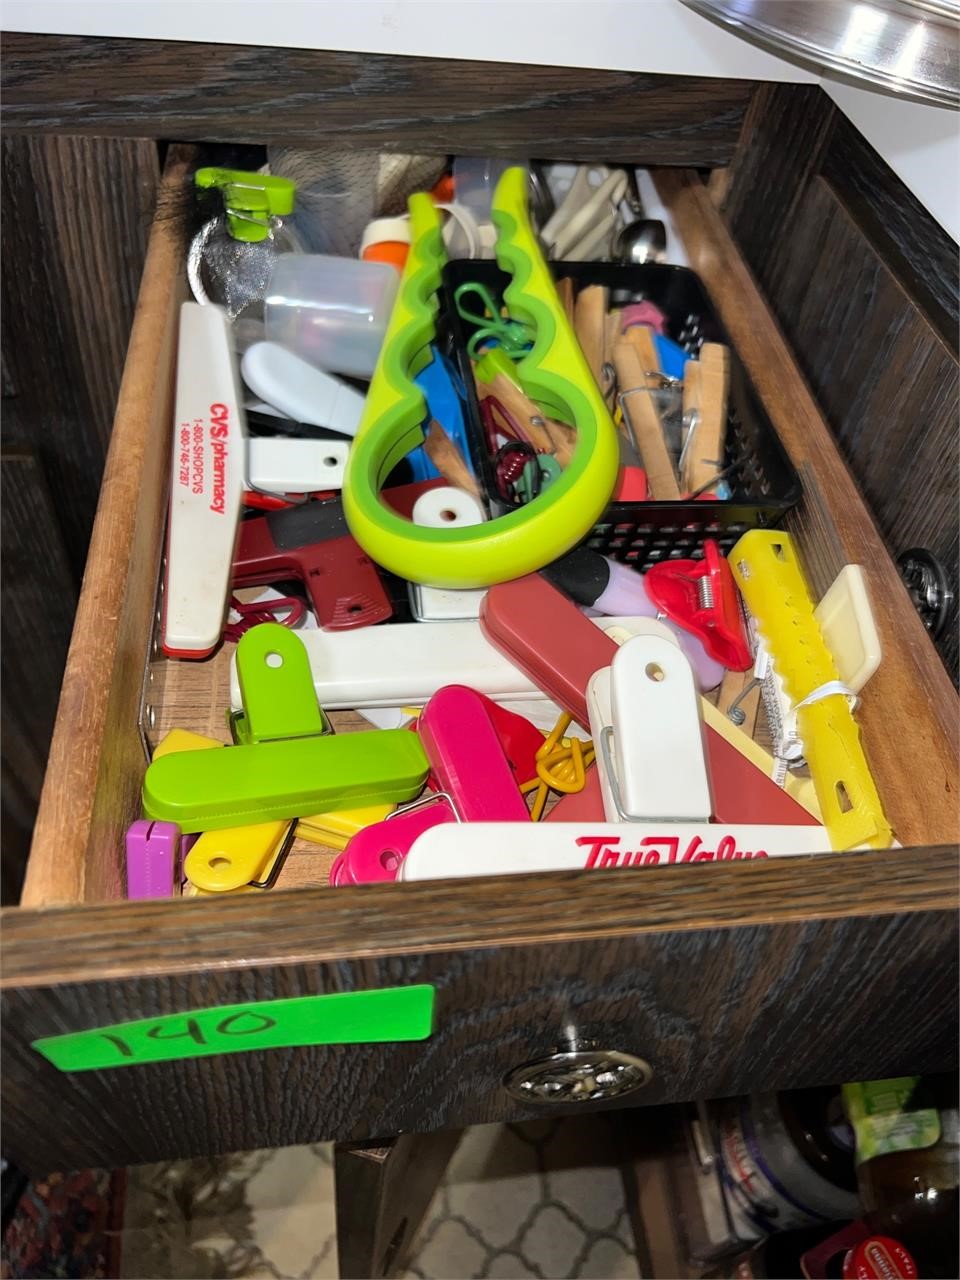 Contents of Drawer - Clips